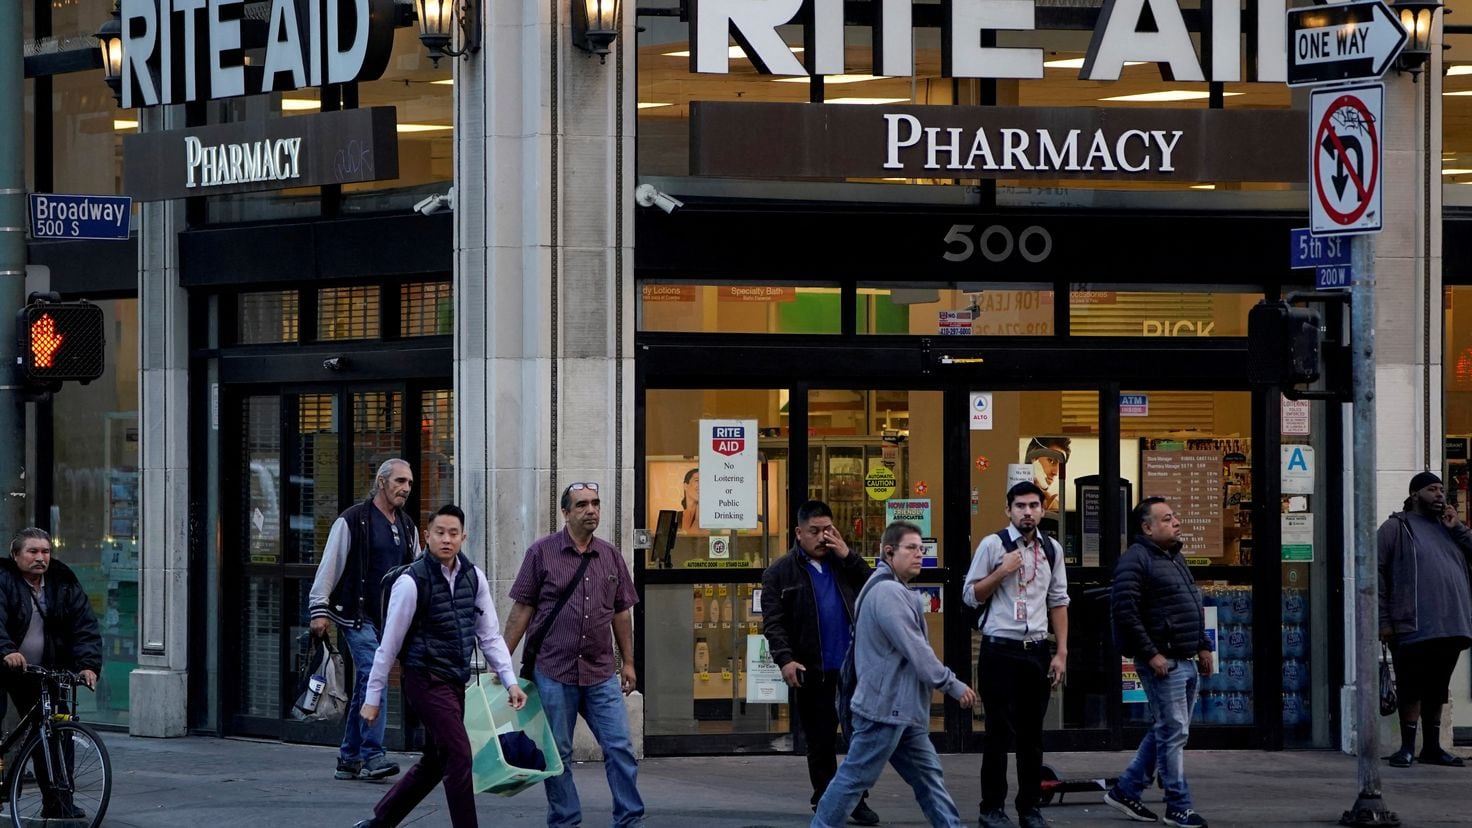 What retailers and store chains have announced closures in 2024? CVS